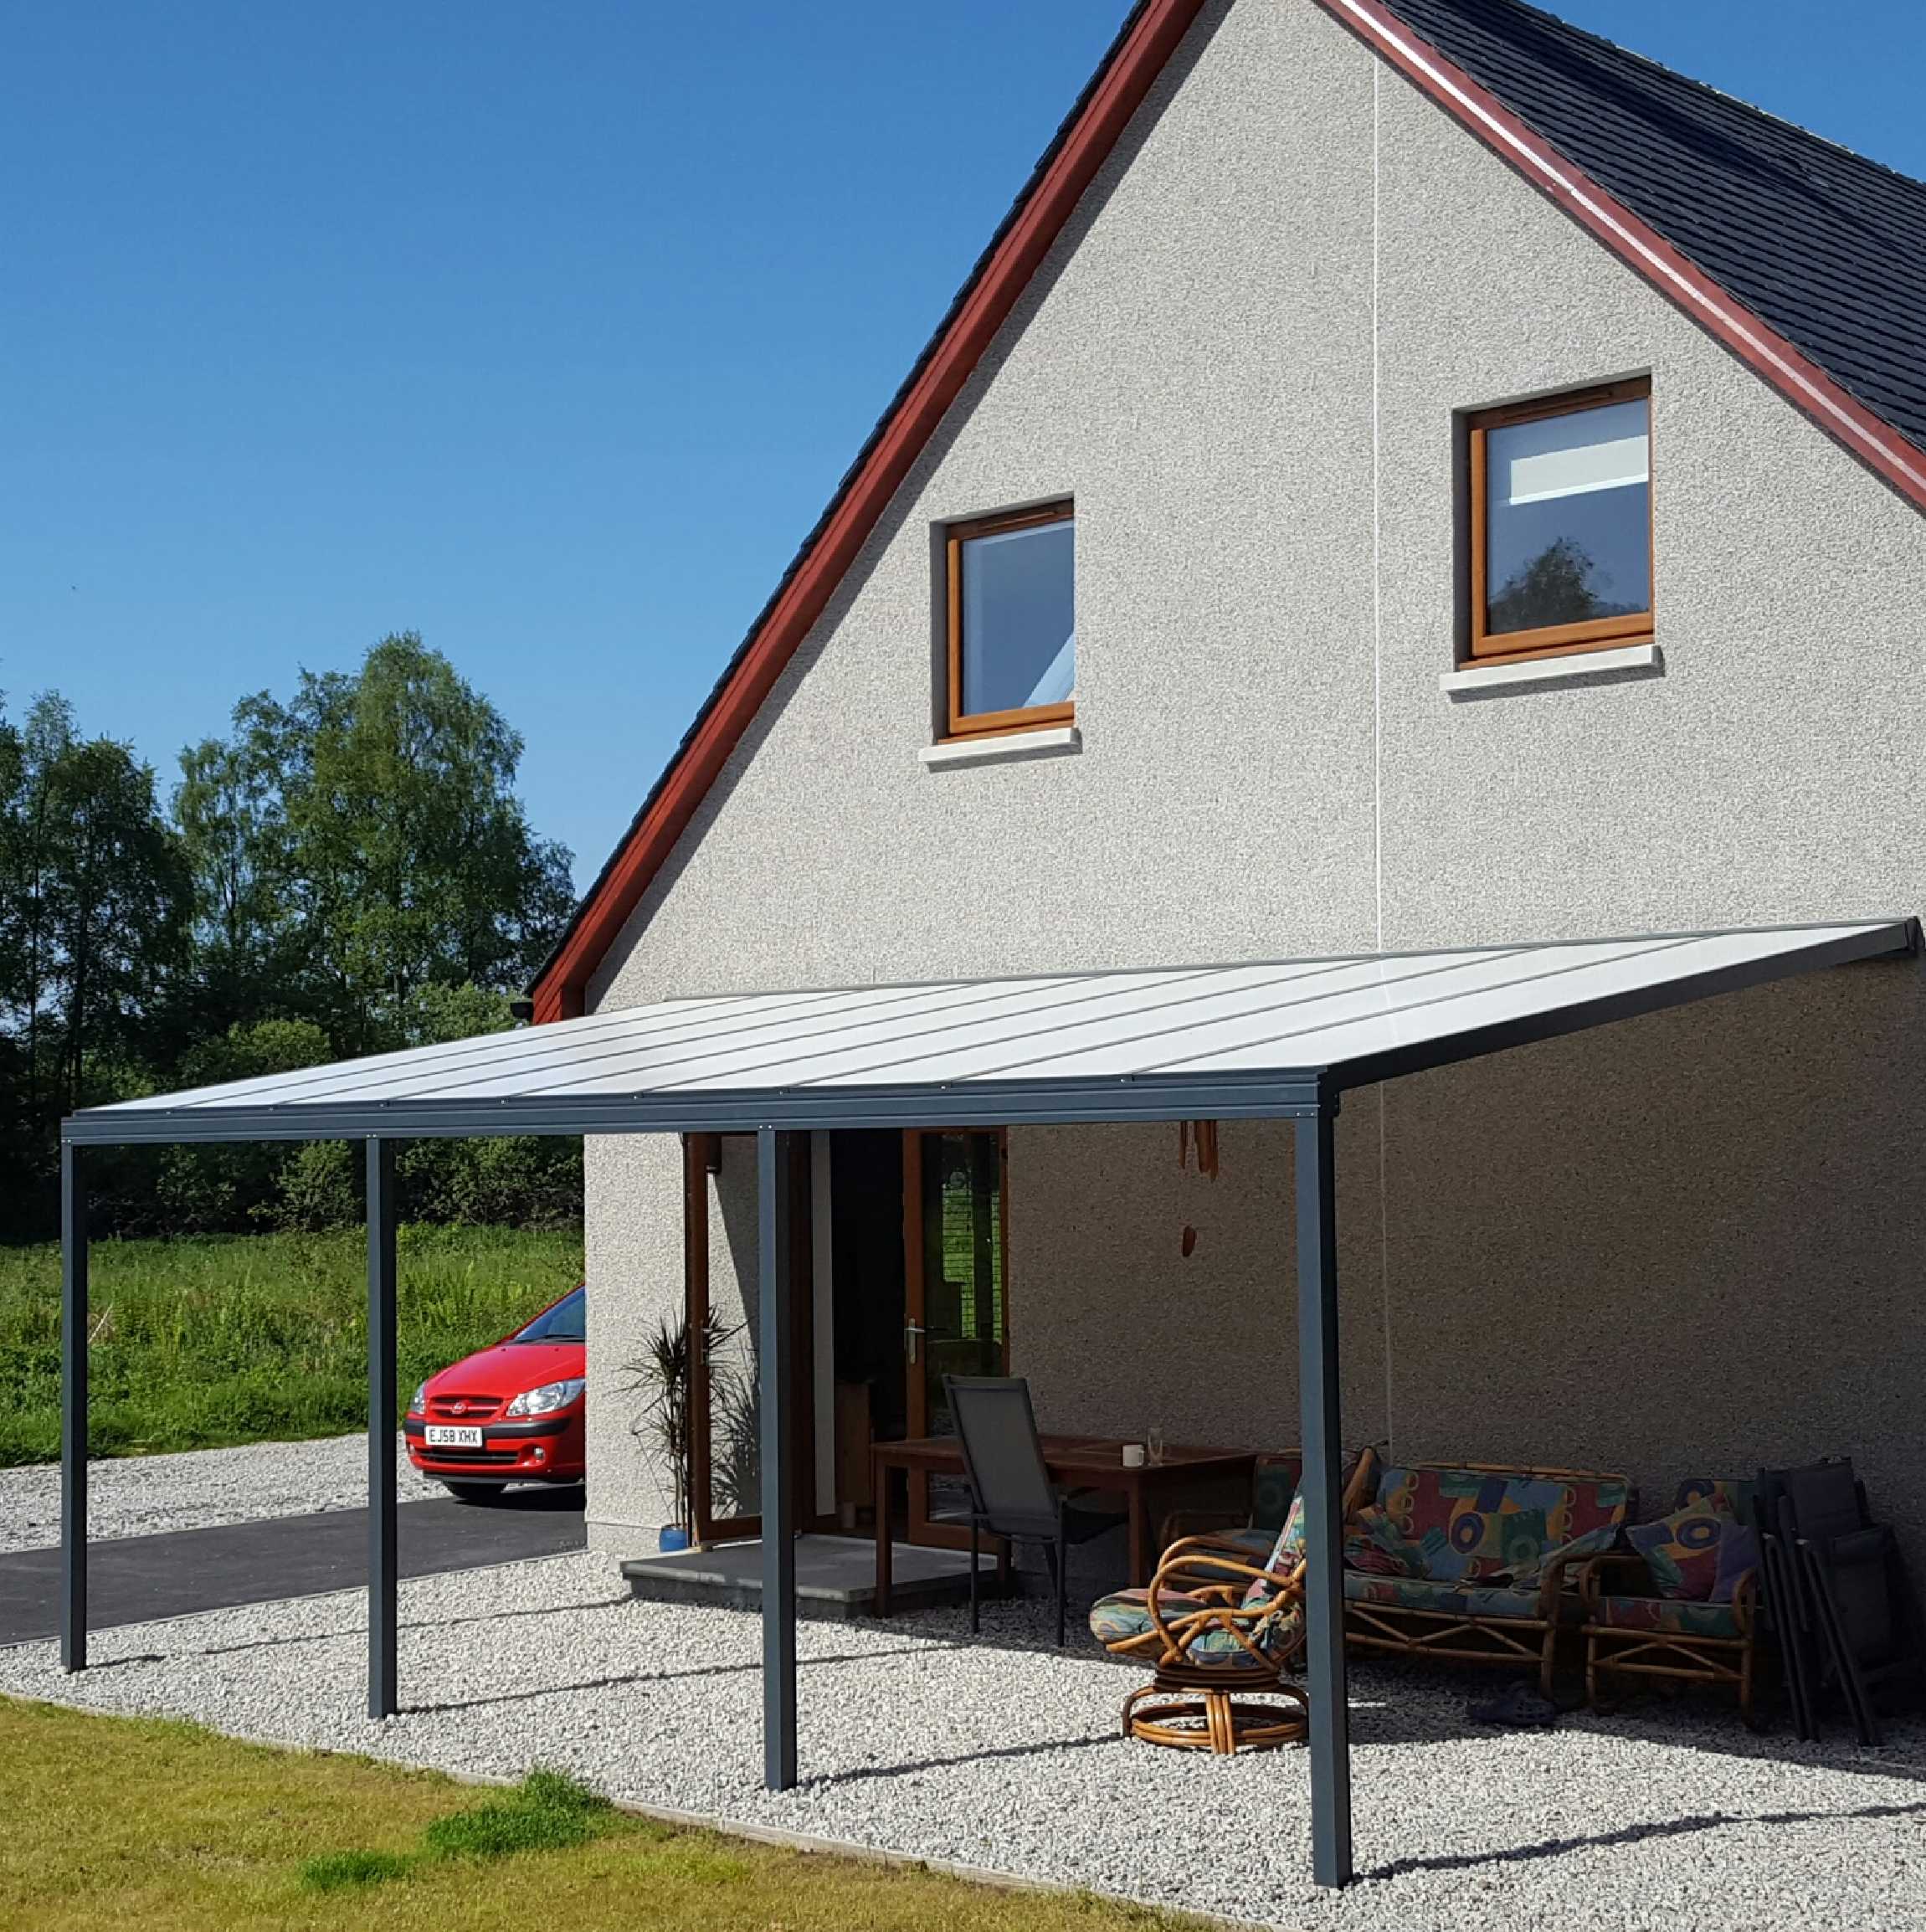 Great selection of SPECIAL OFFER Omega Smart Lean-To Canopy, Anthracite Grey, 16mm Polycarbonate Glazing - 5.0m (W) x 2.5m (P), (3) Supporting Posts